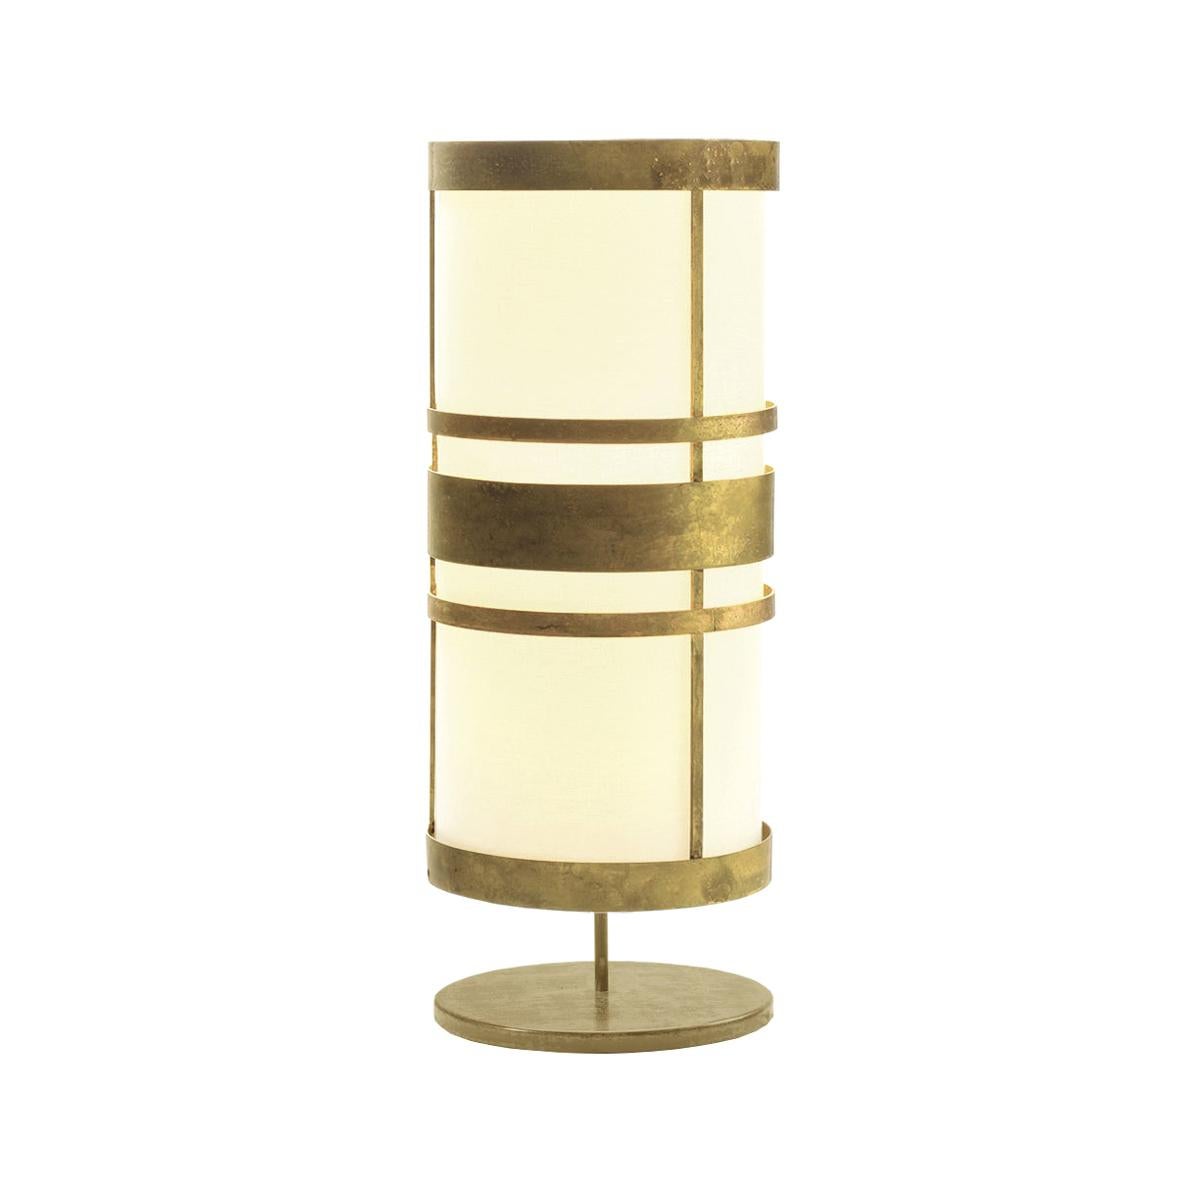 Contemporary Art Deco Inspired Circus Table Lamp Aged Brass For Sale